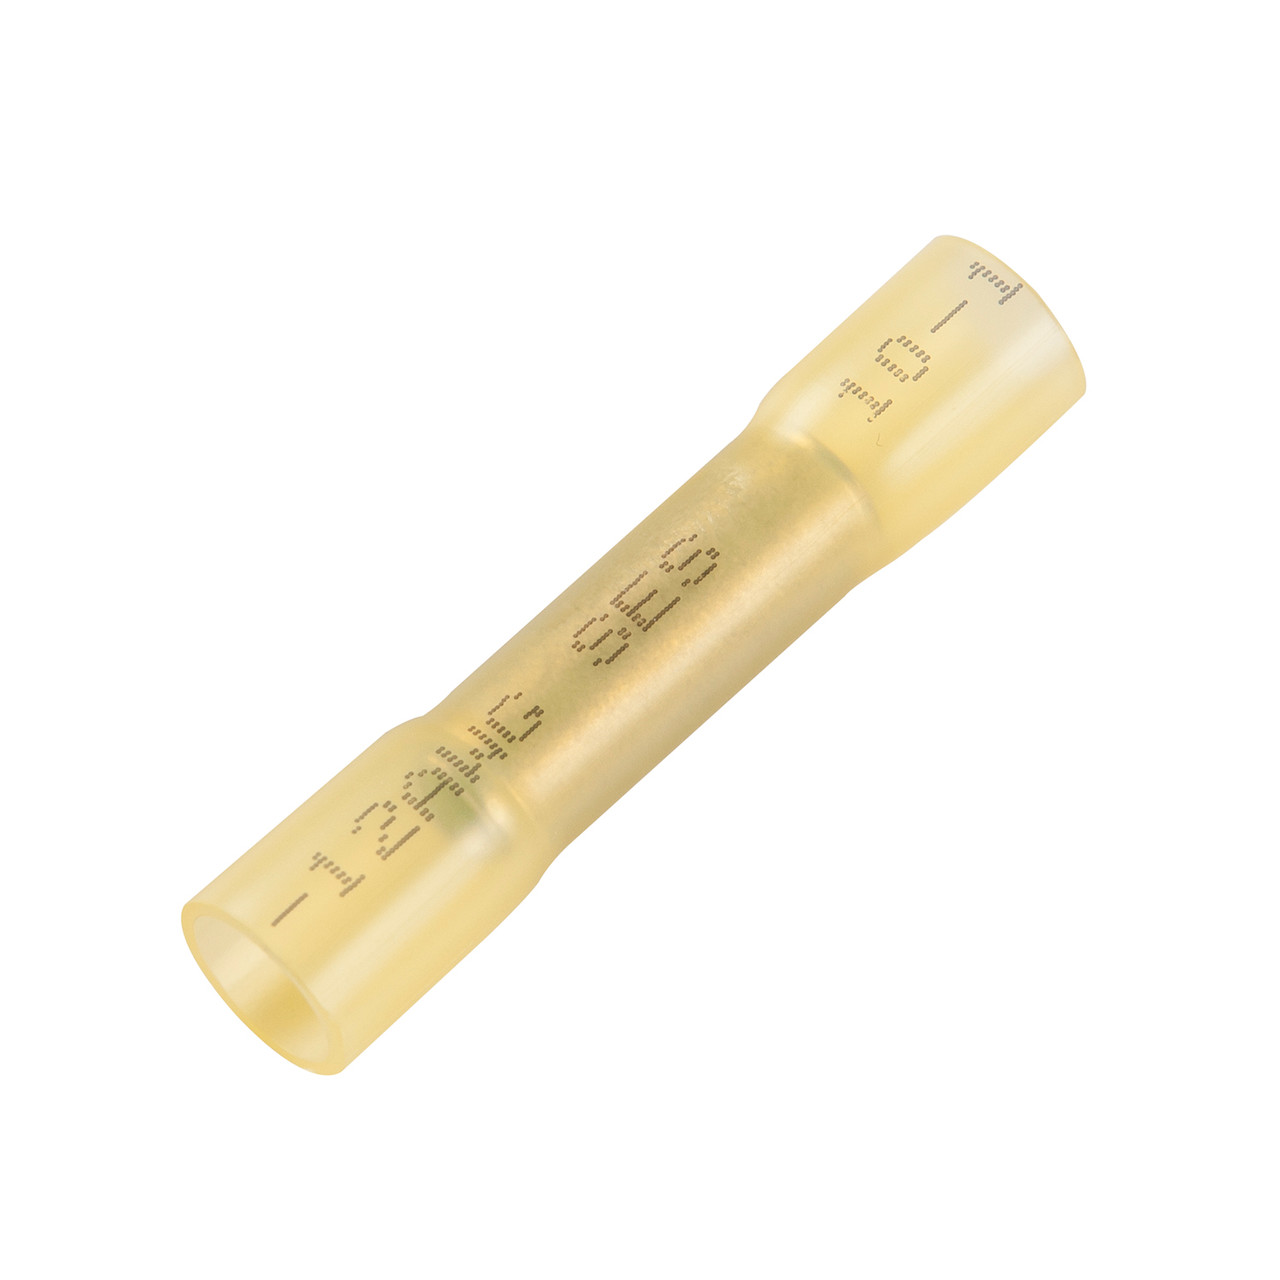 12 - 10 AWG Heat Shrinkable Butt Connectors - Polyolefin @ 15 Pack - Yellow  84-3550